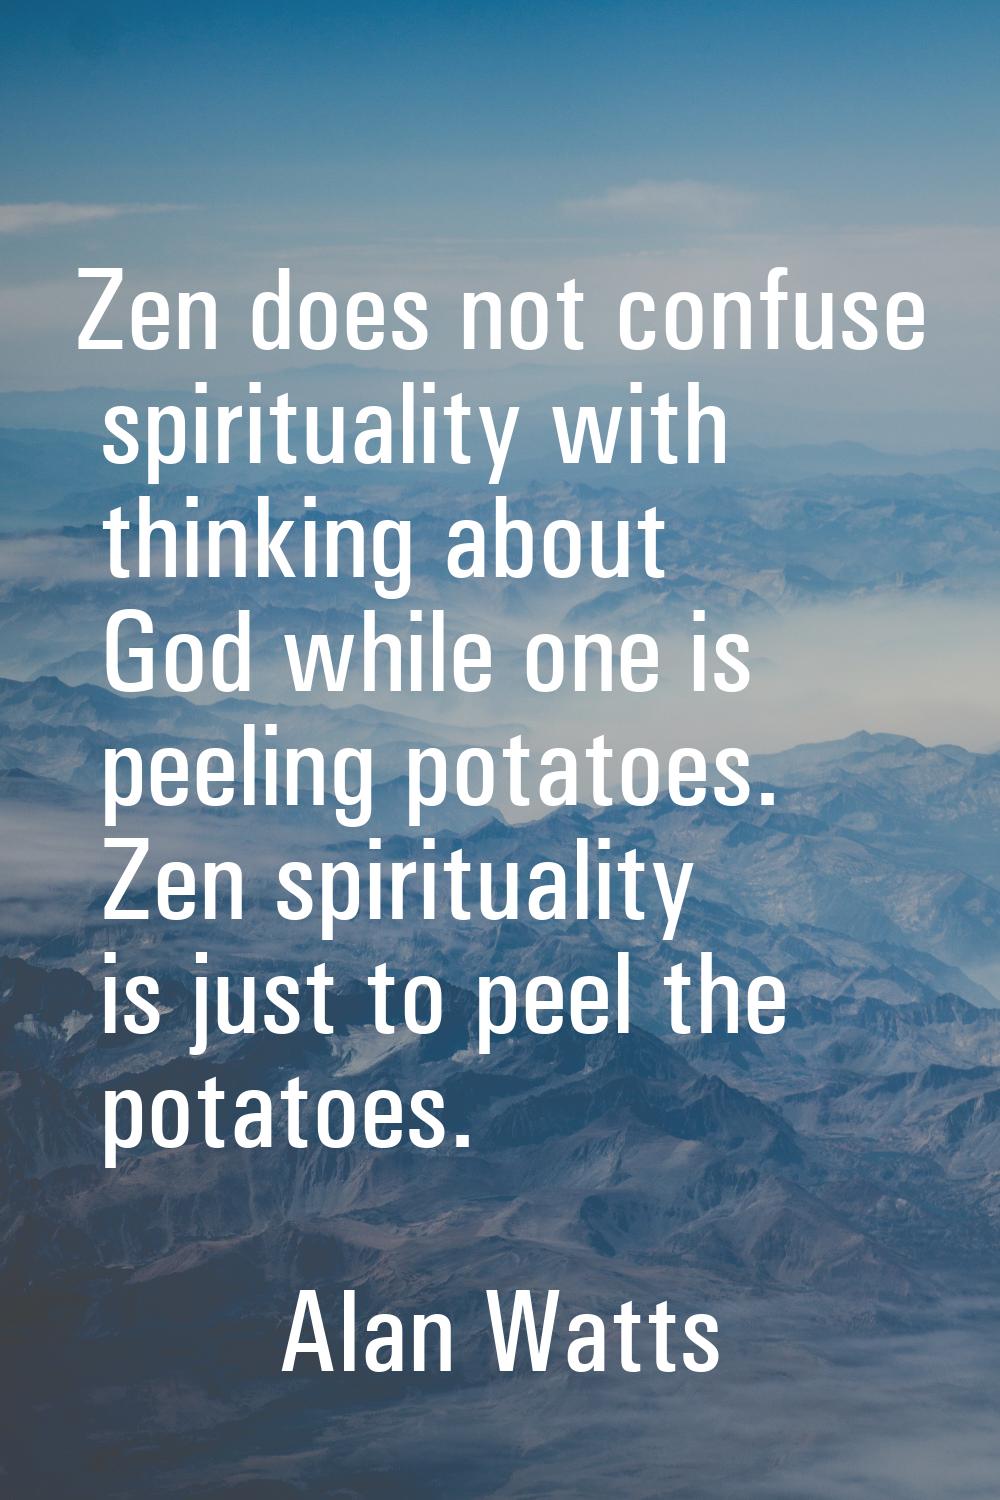 Zen does not confuse spirituality with thinking about God while one is peeling potatoes. Zen spirit